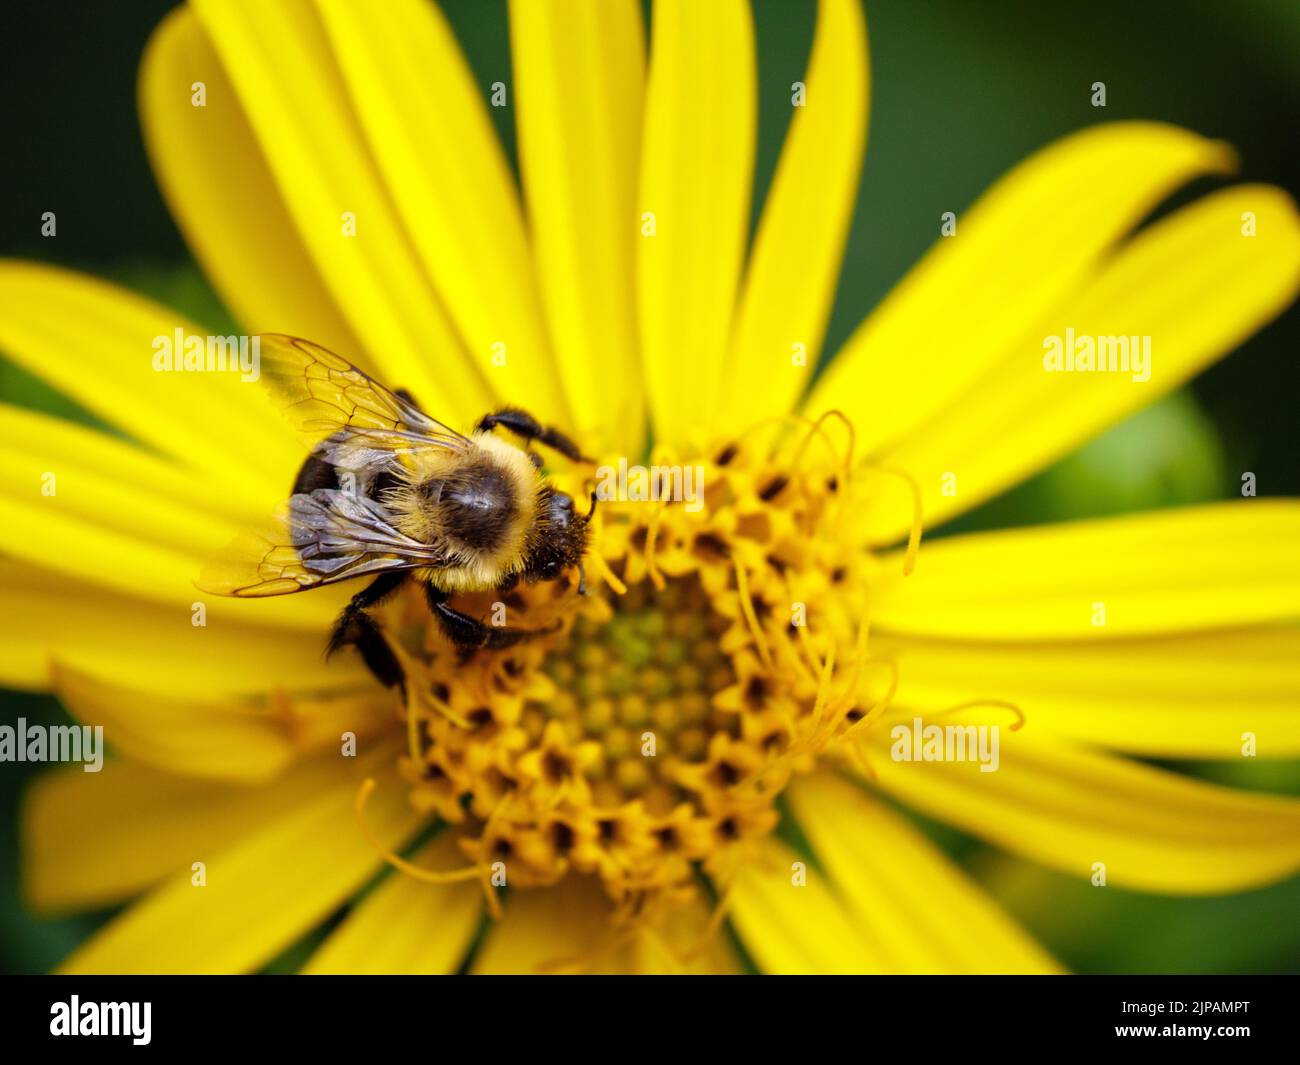 Two-spotted bumble bee (Bombus bimaculatus) on cup plant flower. Stock Photo